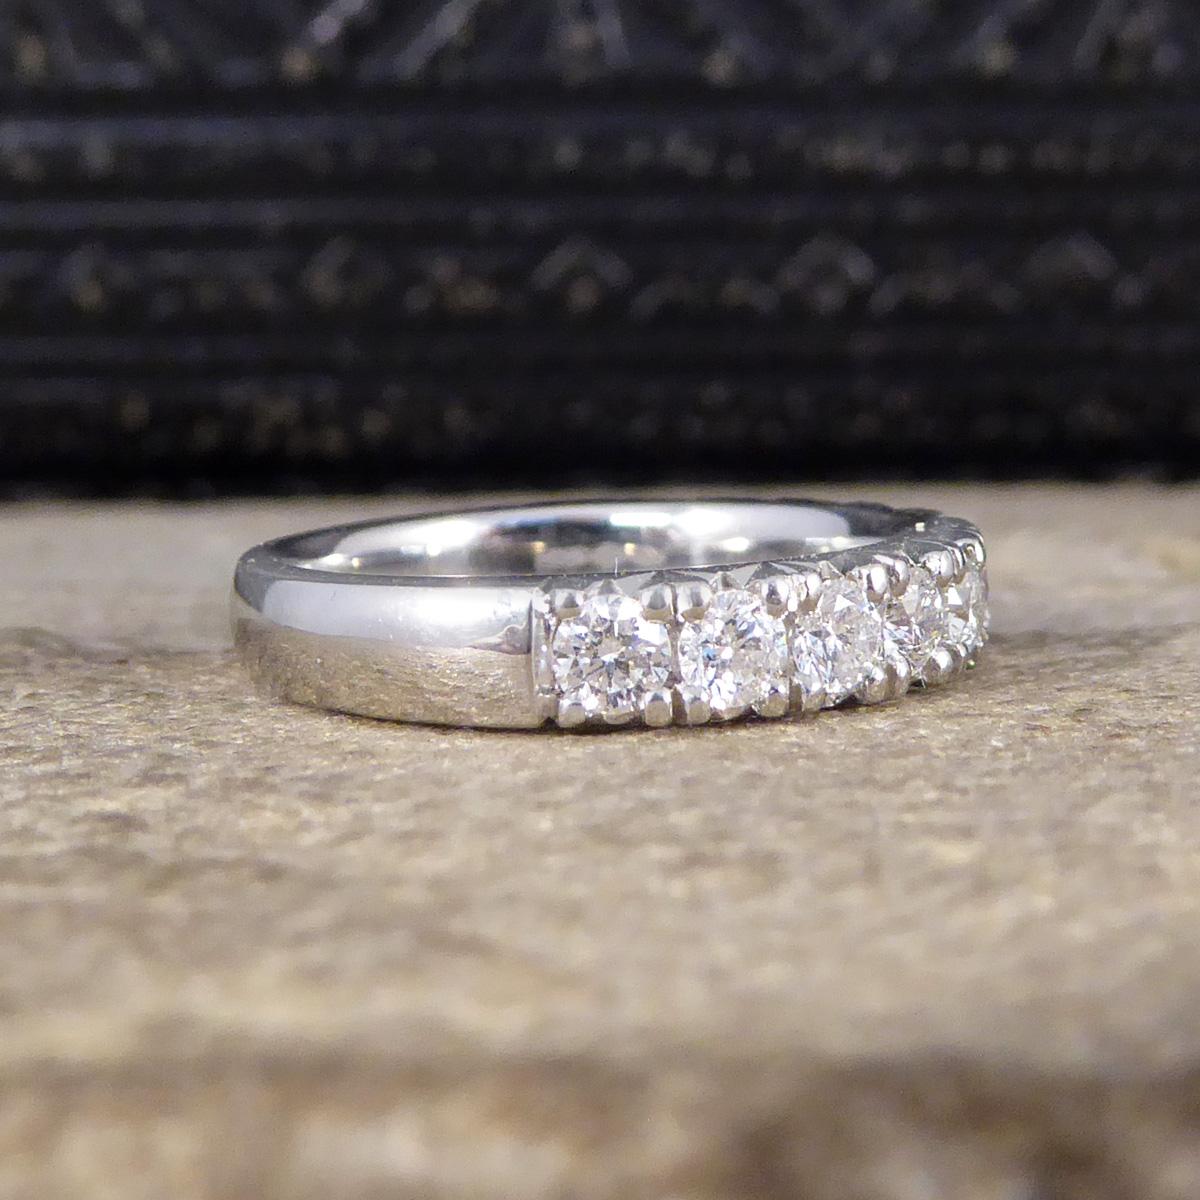 New Diamond Set Eternity Ring with 0.88ct Modern Brilliant Cut Diamonds in Plat In New Condition For Sale In Yorkshire, West Yorkshire